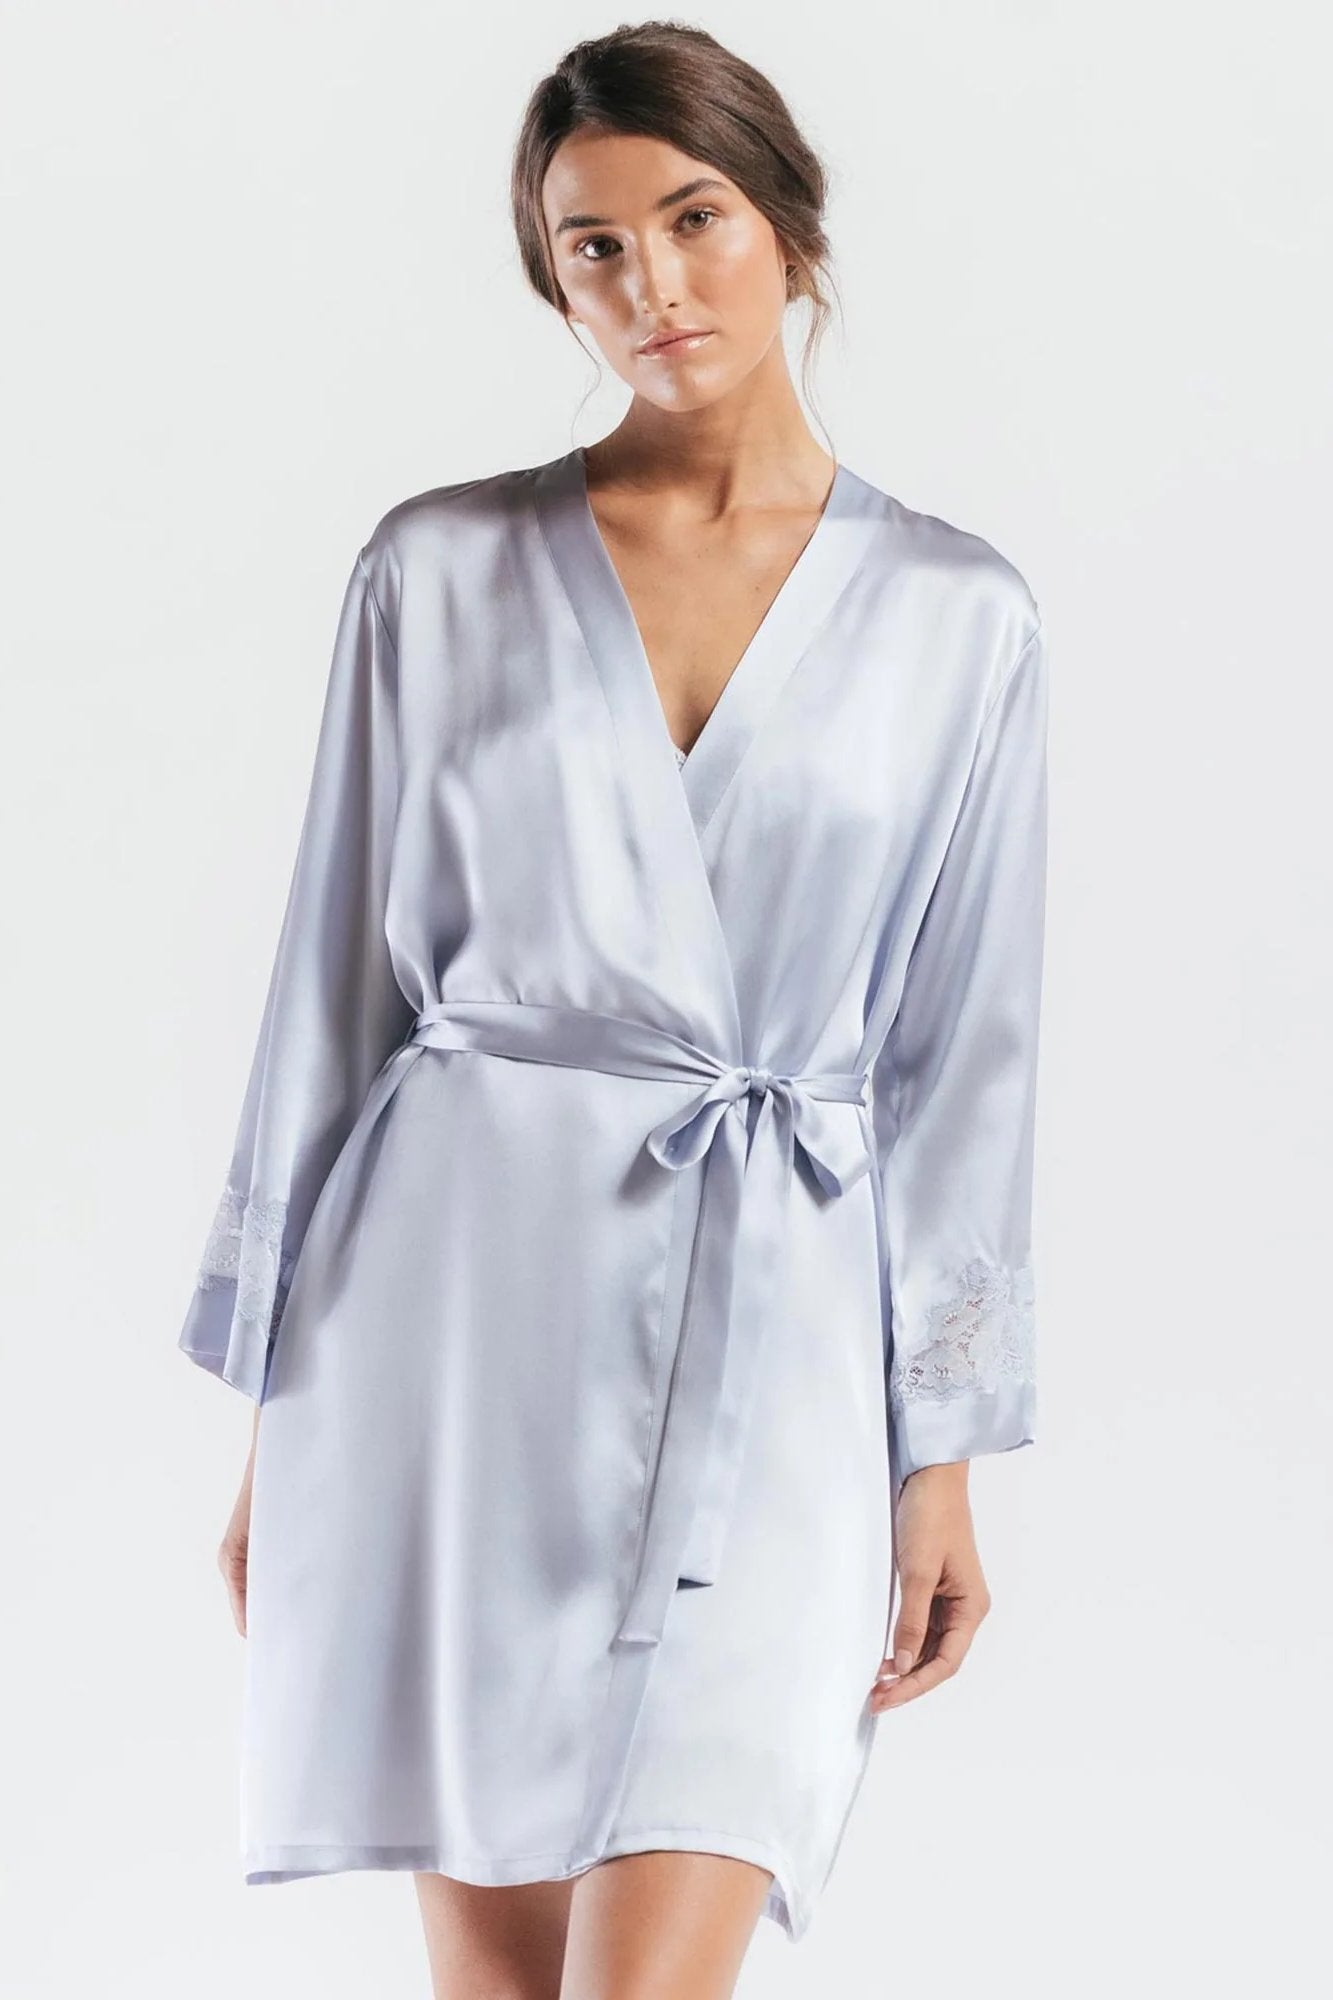 MONTELLE INTIMATES Cinched Satin Trim Nightgown - Heather Grey